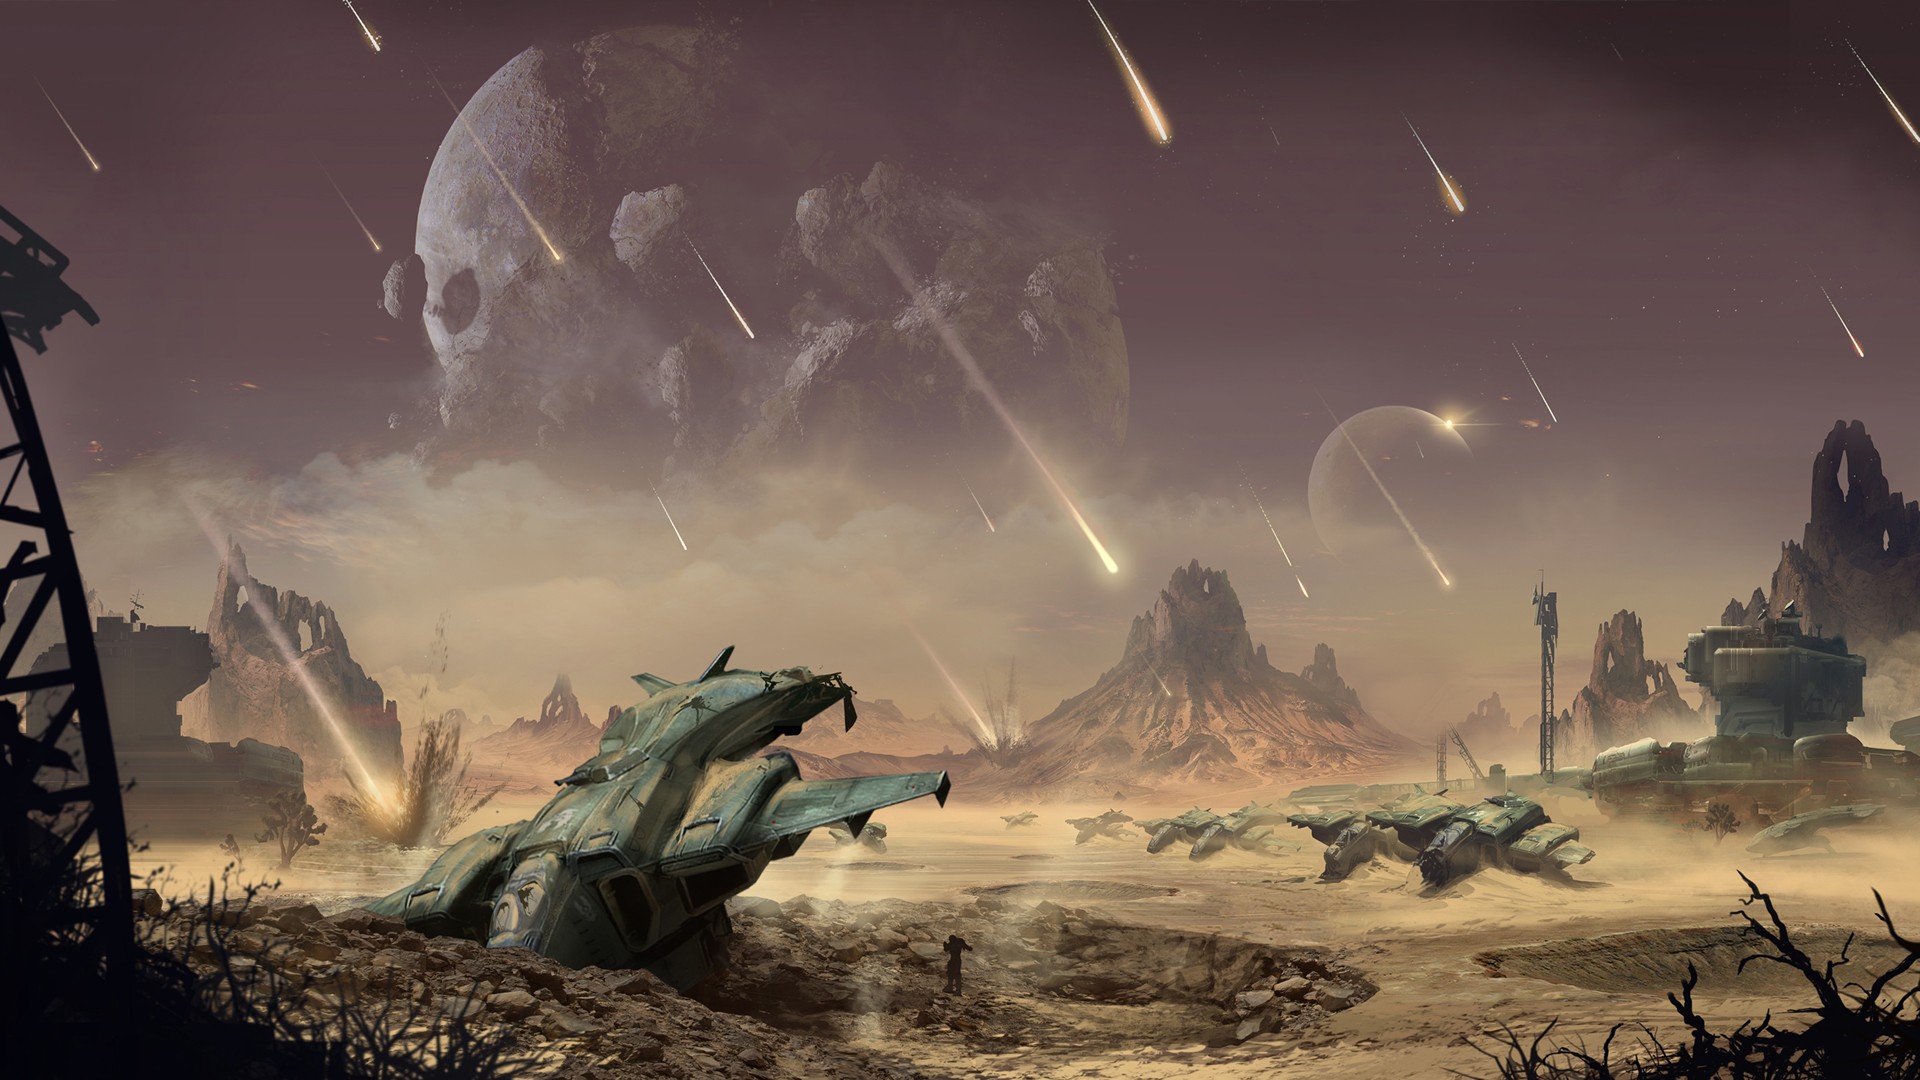 General 1920x1080 video games video game art Halo (game) science fiction Pelican (Halo) desert planet destroyed ruins meteorite landscape wreck vehicle